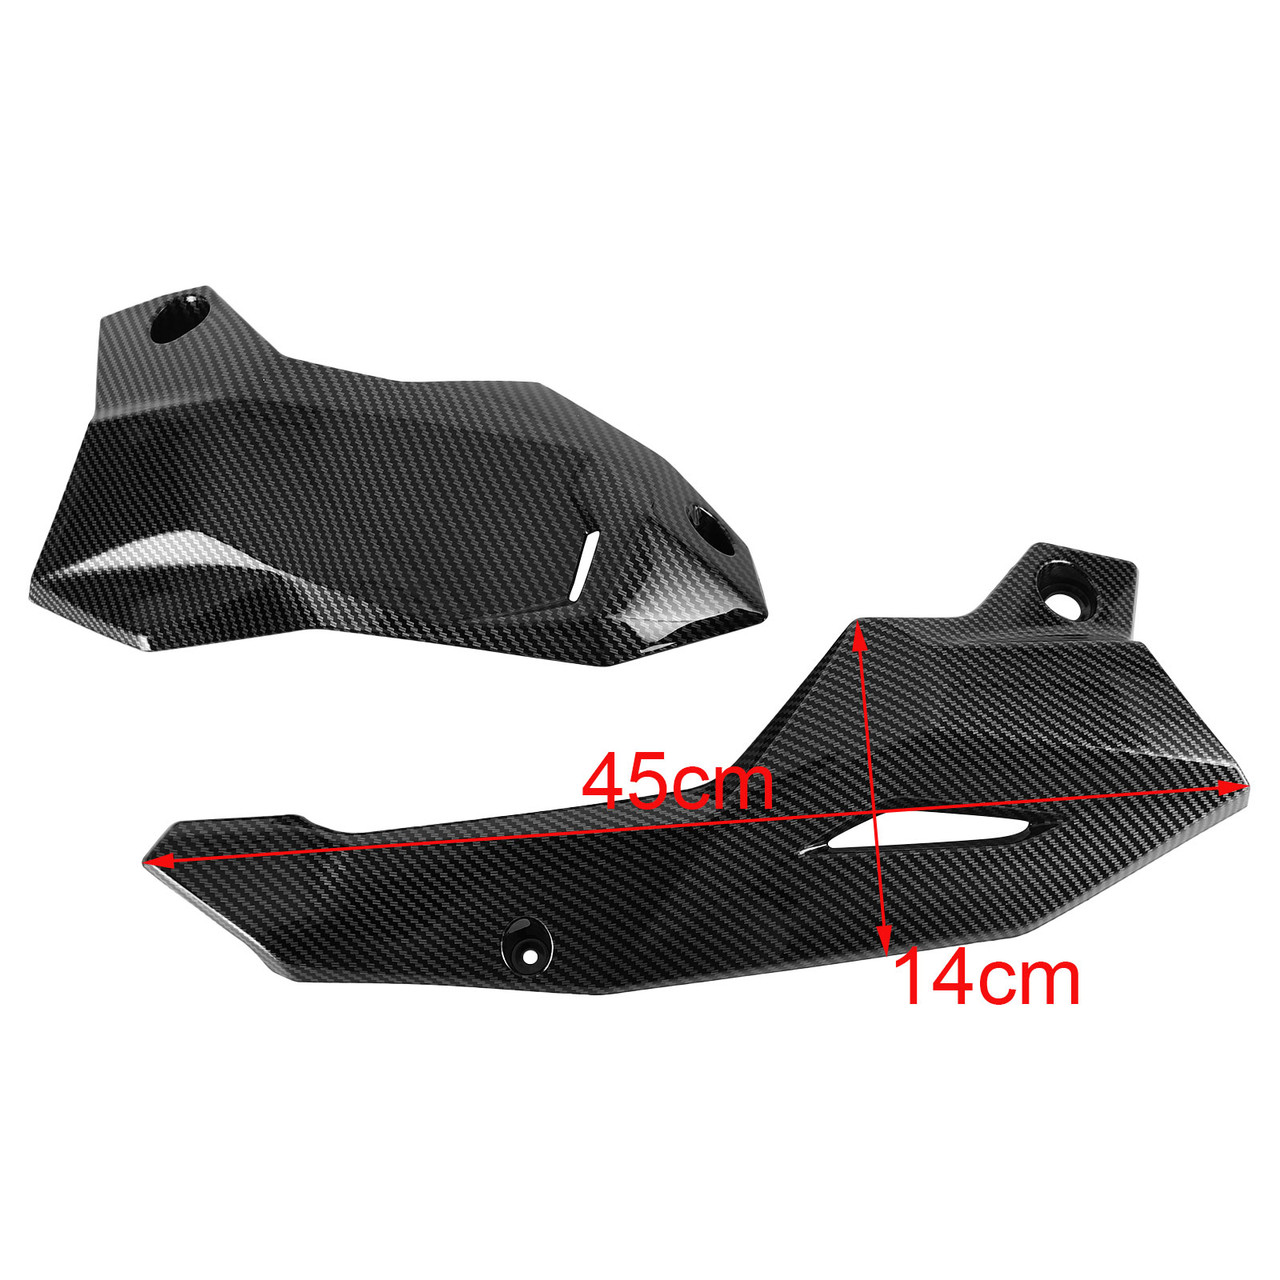 Engine Lower Protection Cover For Kawasaki Z900 2020-2021 CBN